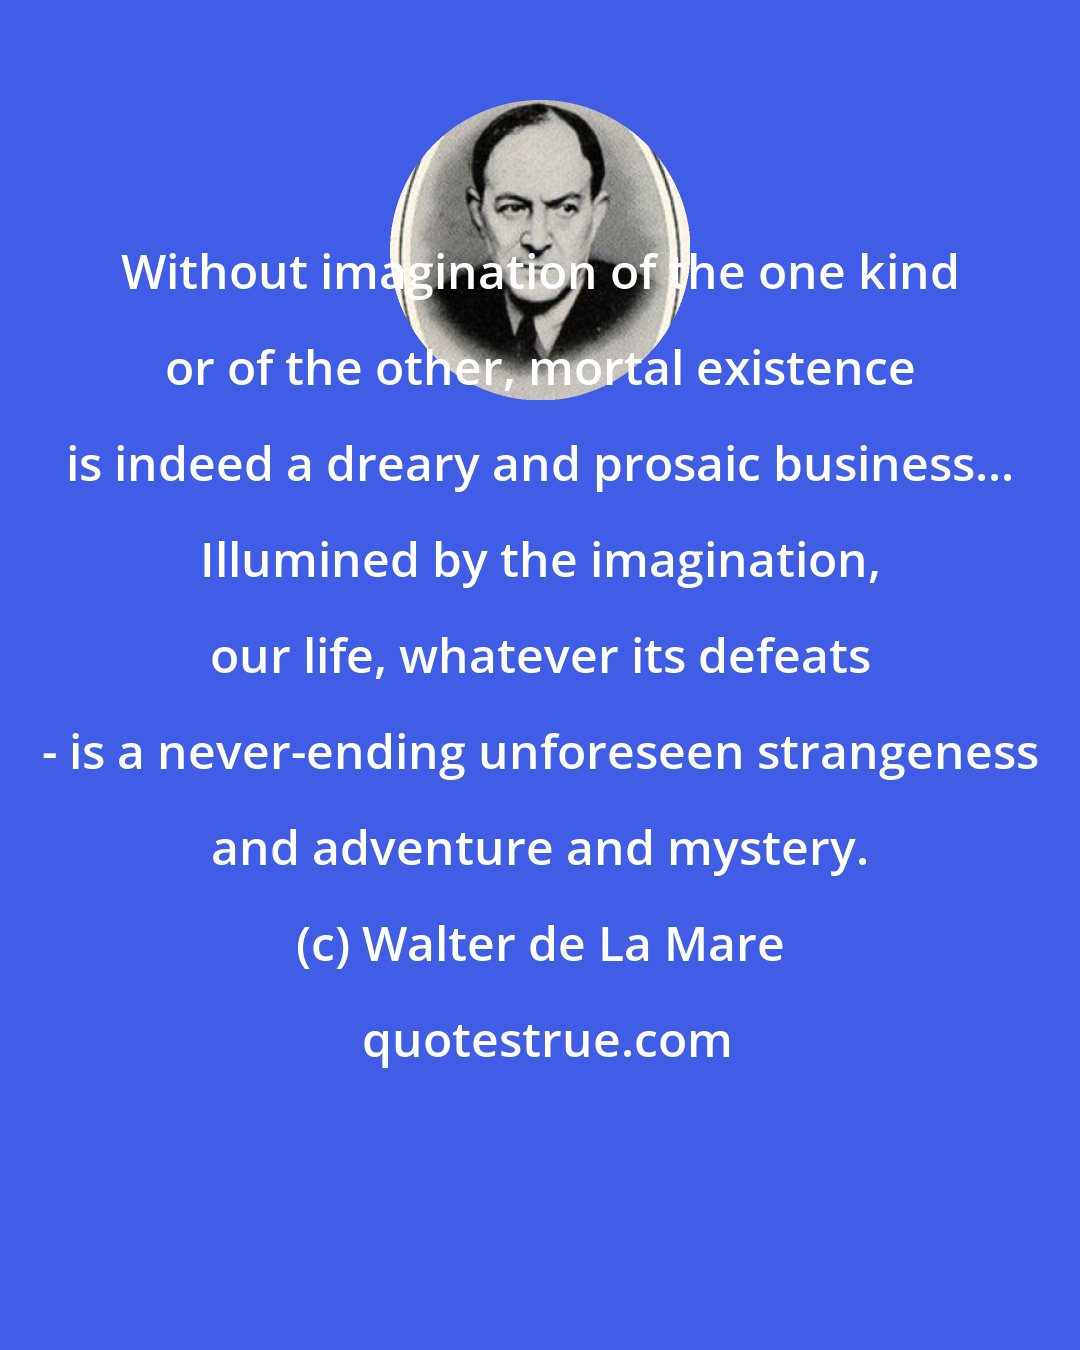 Walter de La Mare: Without imagination of the one kind or of the other, mortal existence is indeed a dreary and prosaic business... Illumined by the imagination, our life, whatever its defeats - is a never-ending unforeseen strangeness and adventure and mystery.